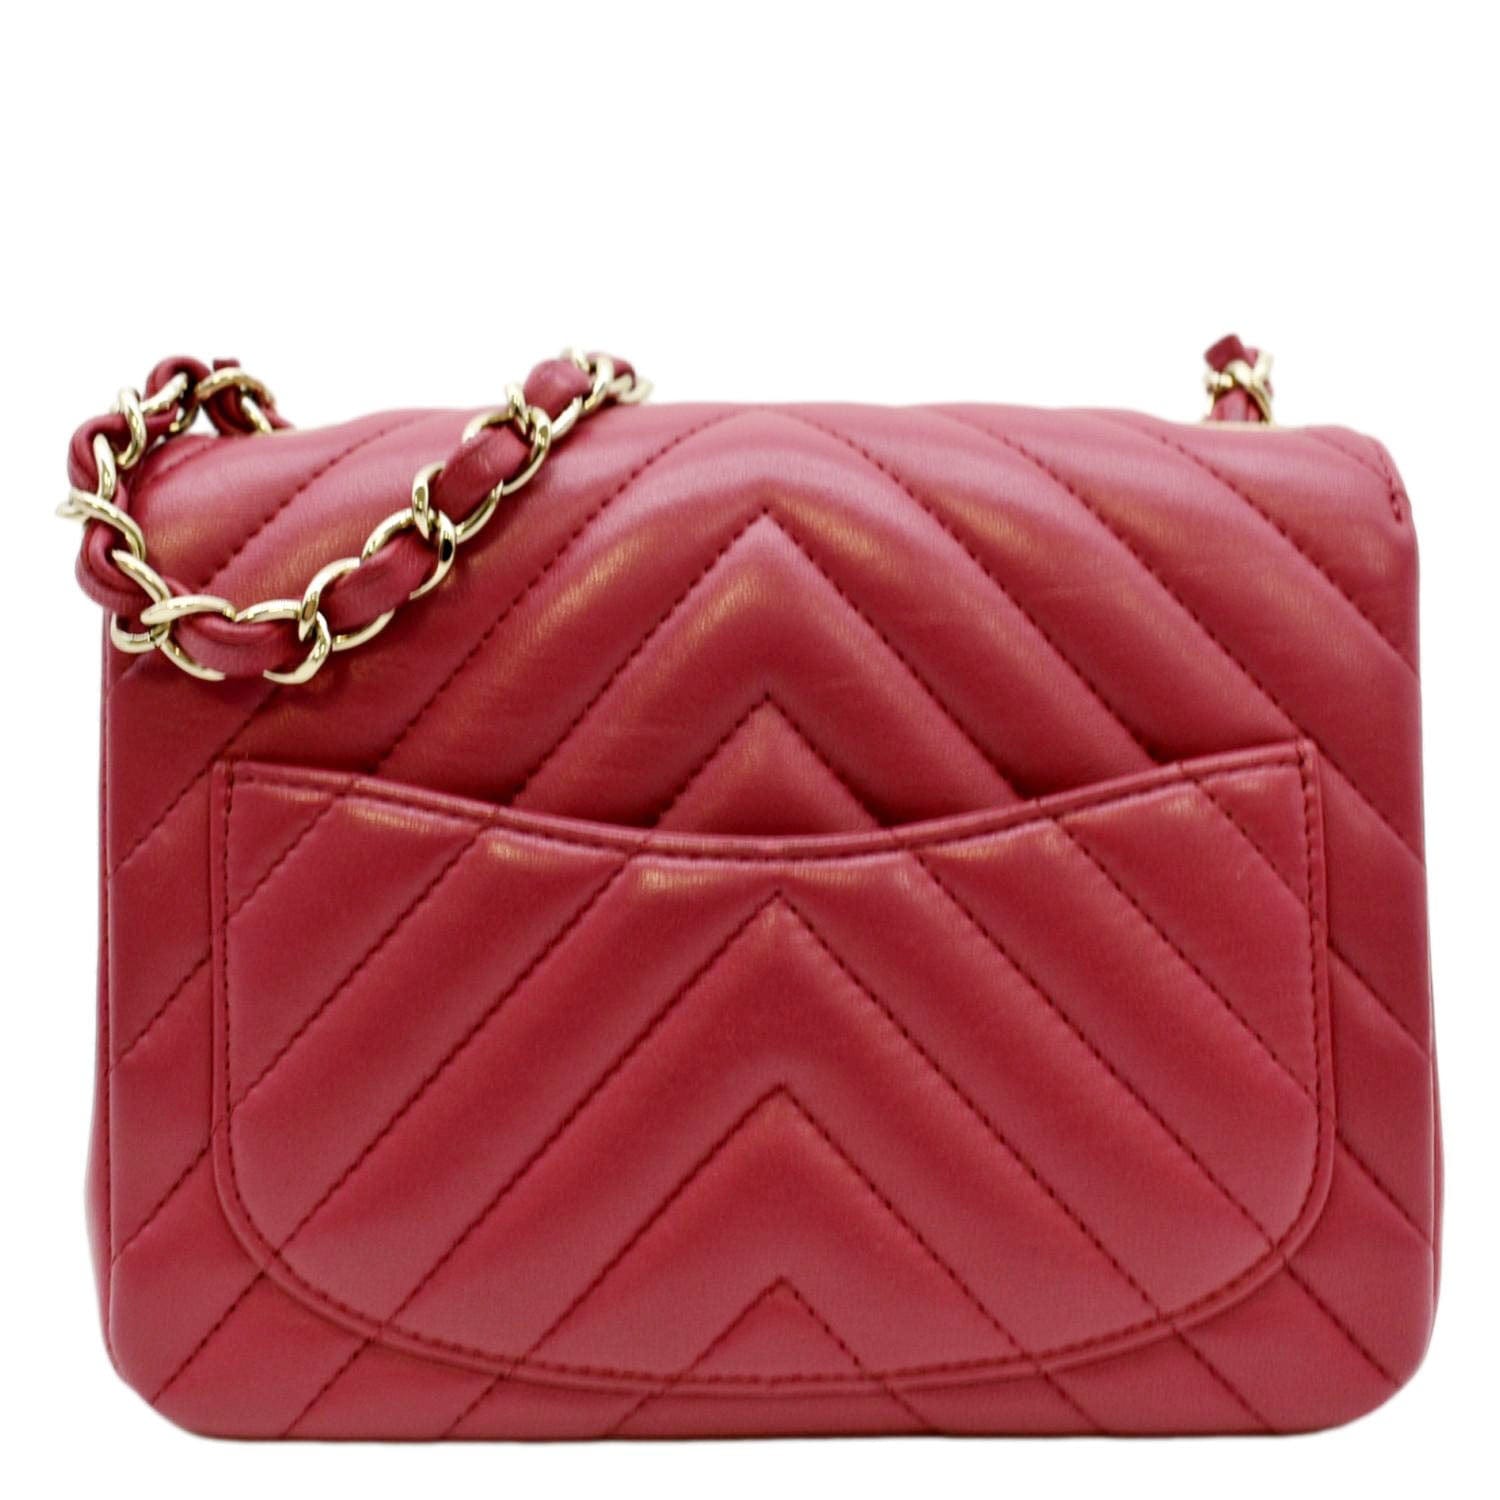 Chanel Rectangular Flap Mini Quilted Chevron Leather Shoulder Bag Red